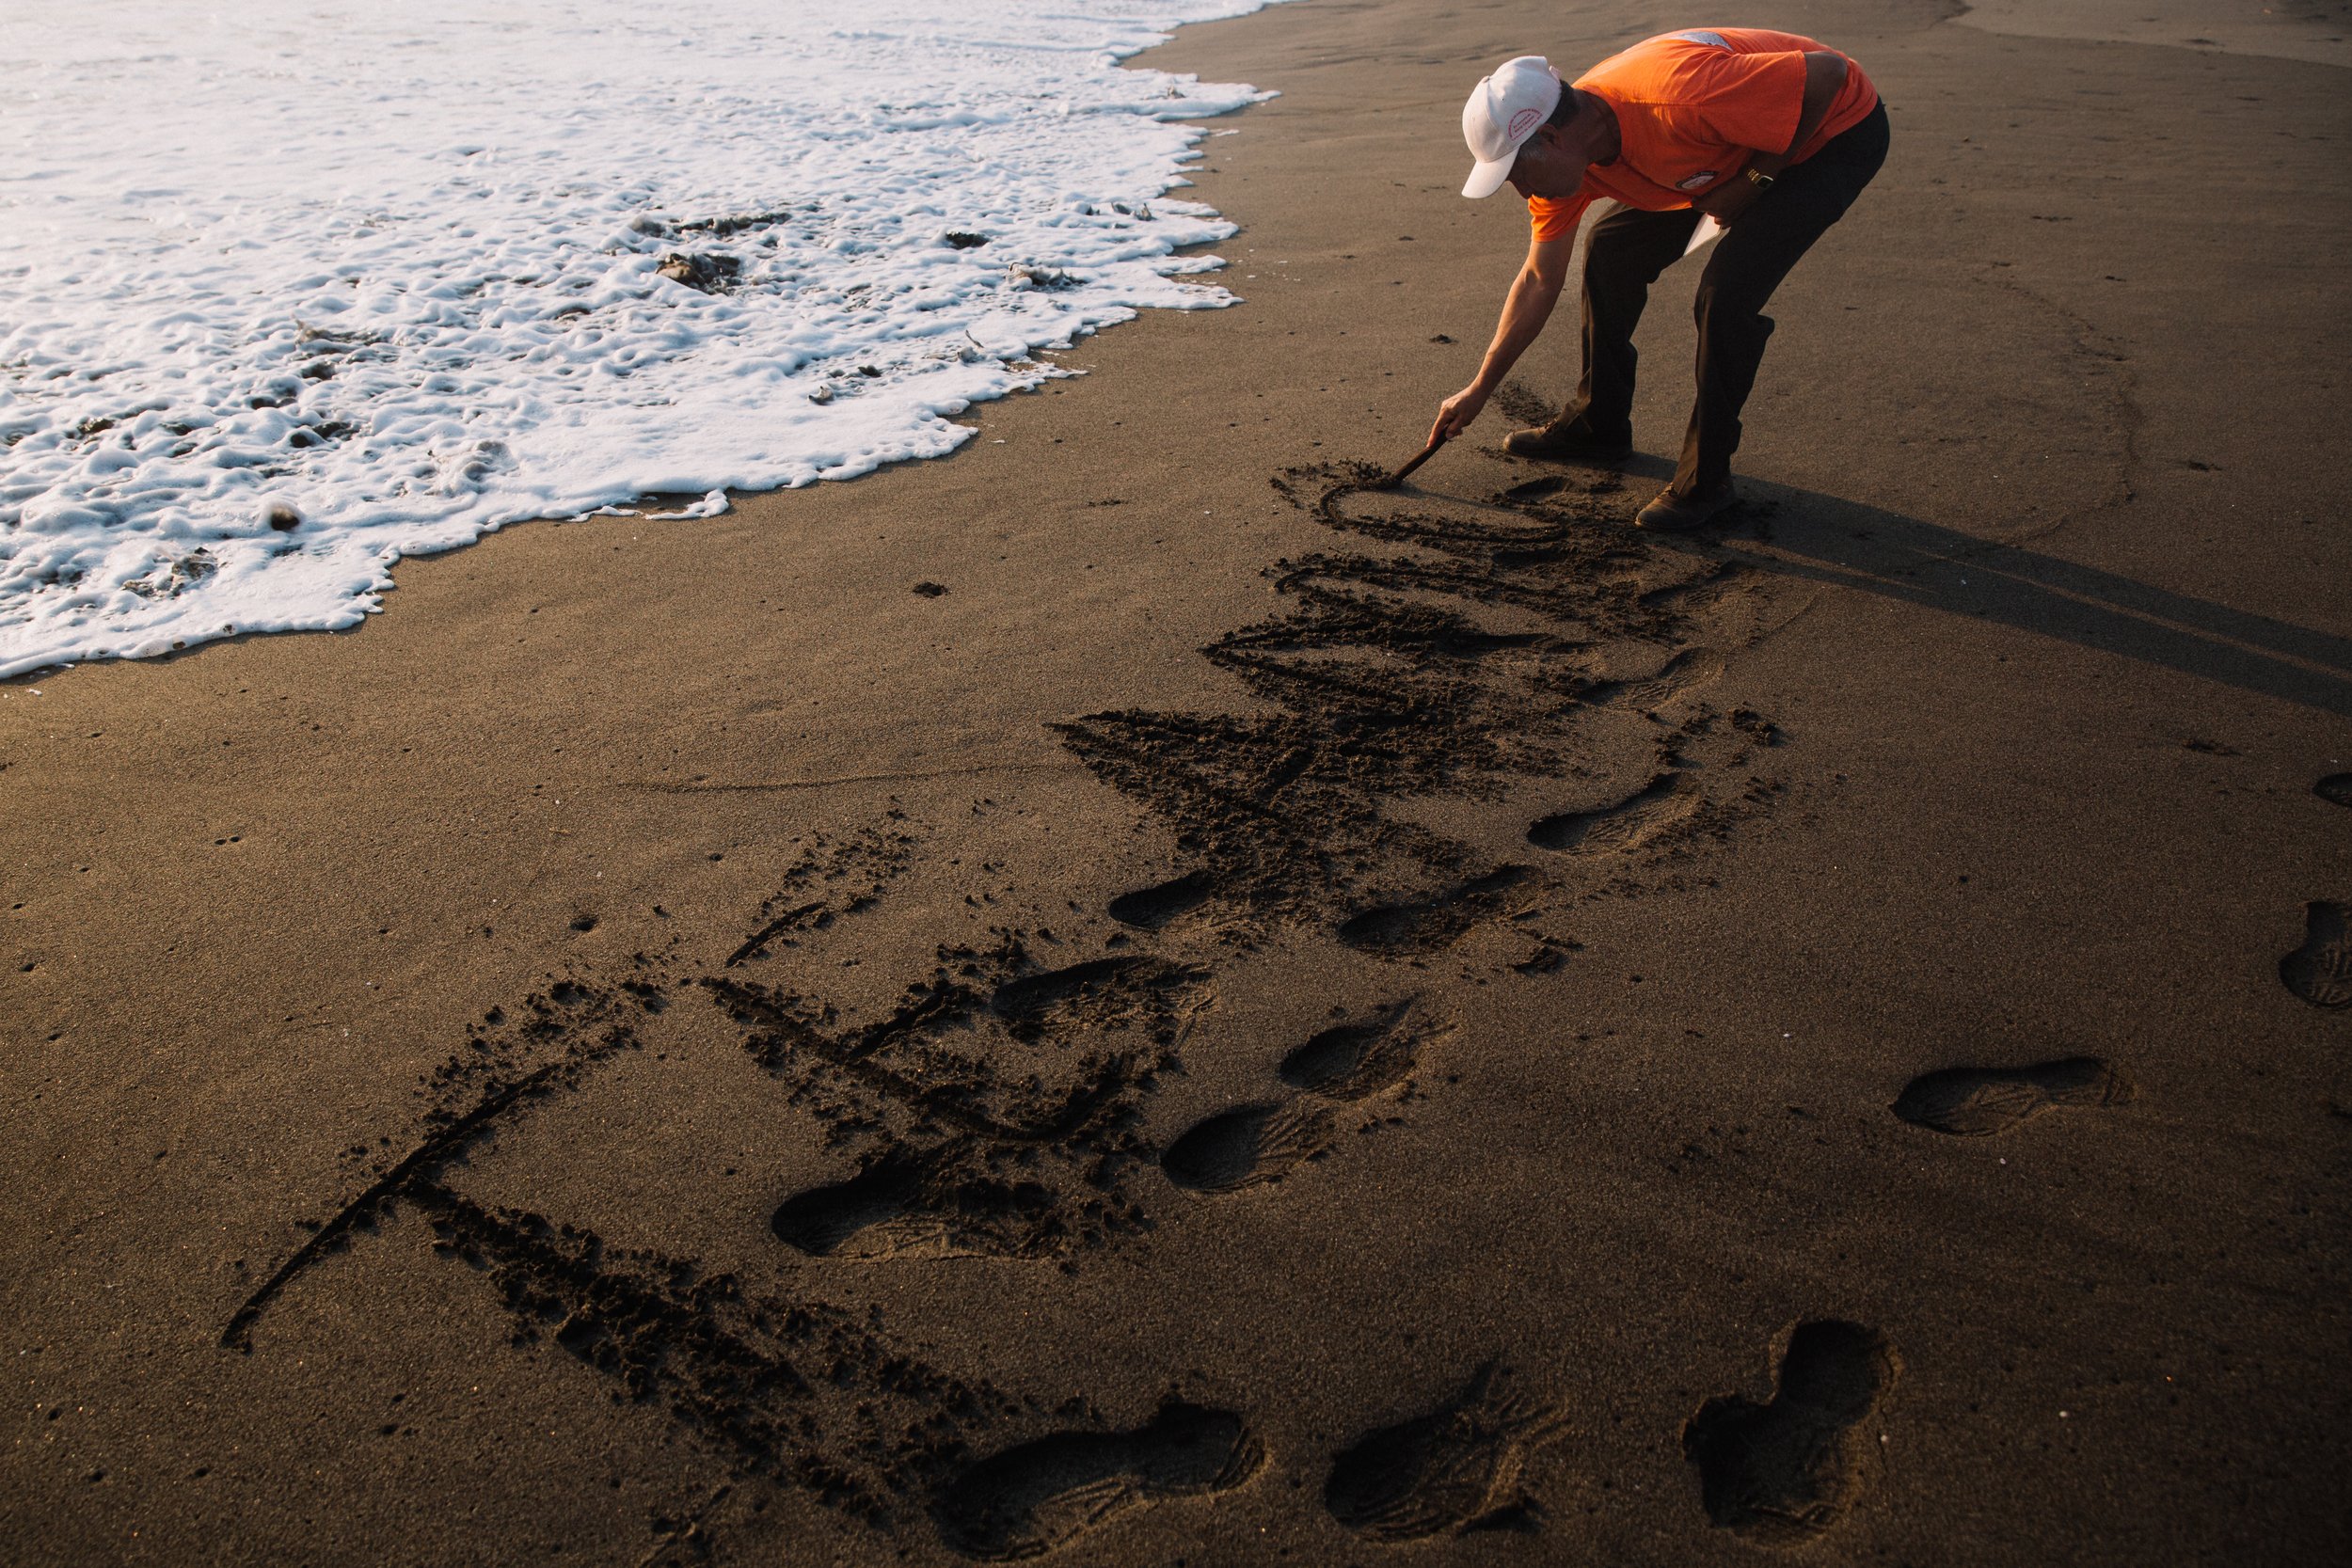  Hector Felipe Rodriguez, a father from Honduras, writes a heartfelt message in the sand at Barra de San Jose, Villa Mazatan, Chiapas, Mexico, a new route taken by many migrants due to the dangers of traditional routes under the Frontera Sur border p